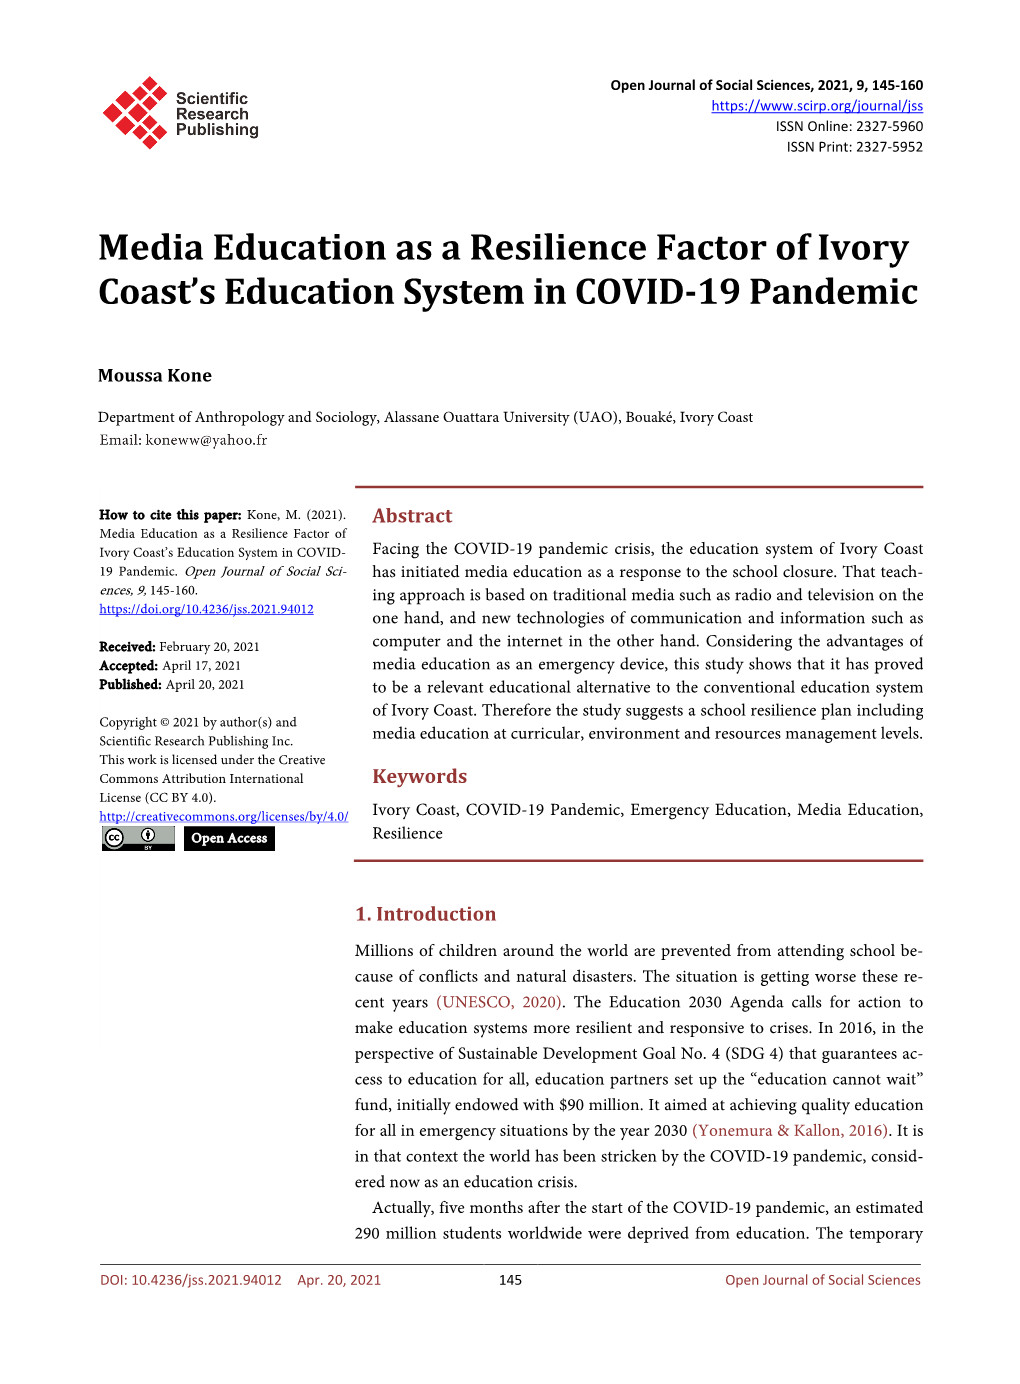 Media Education As a Resilience Factor of Ivory Coast's Education